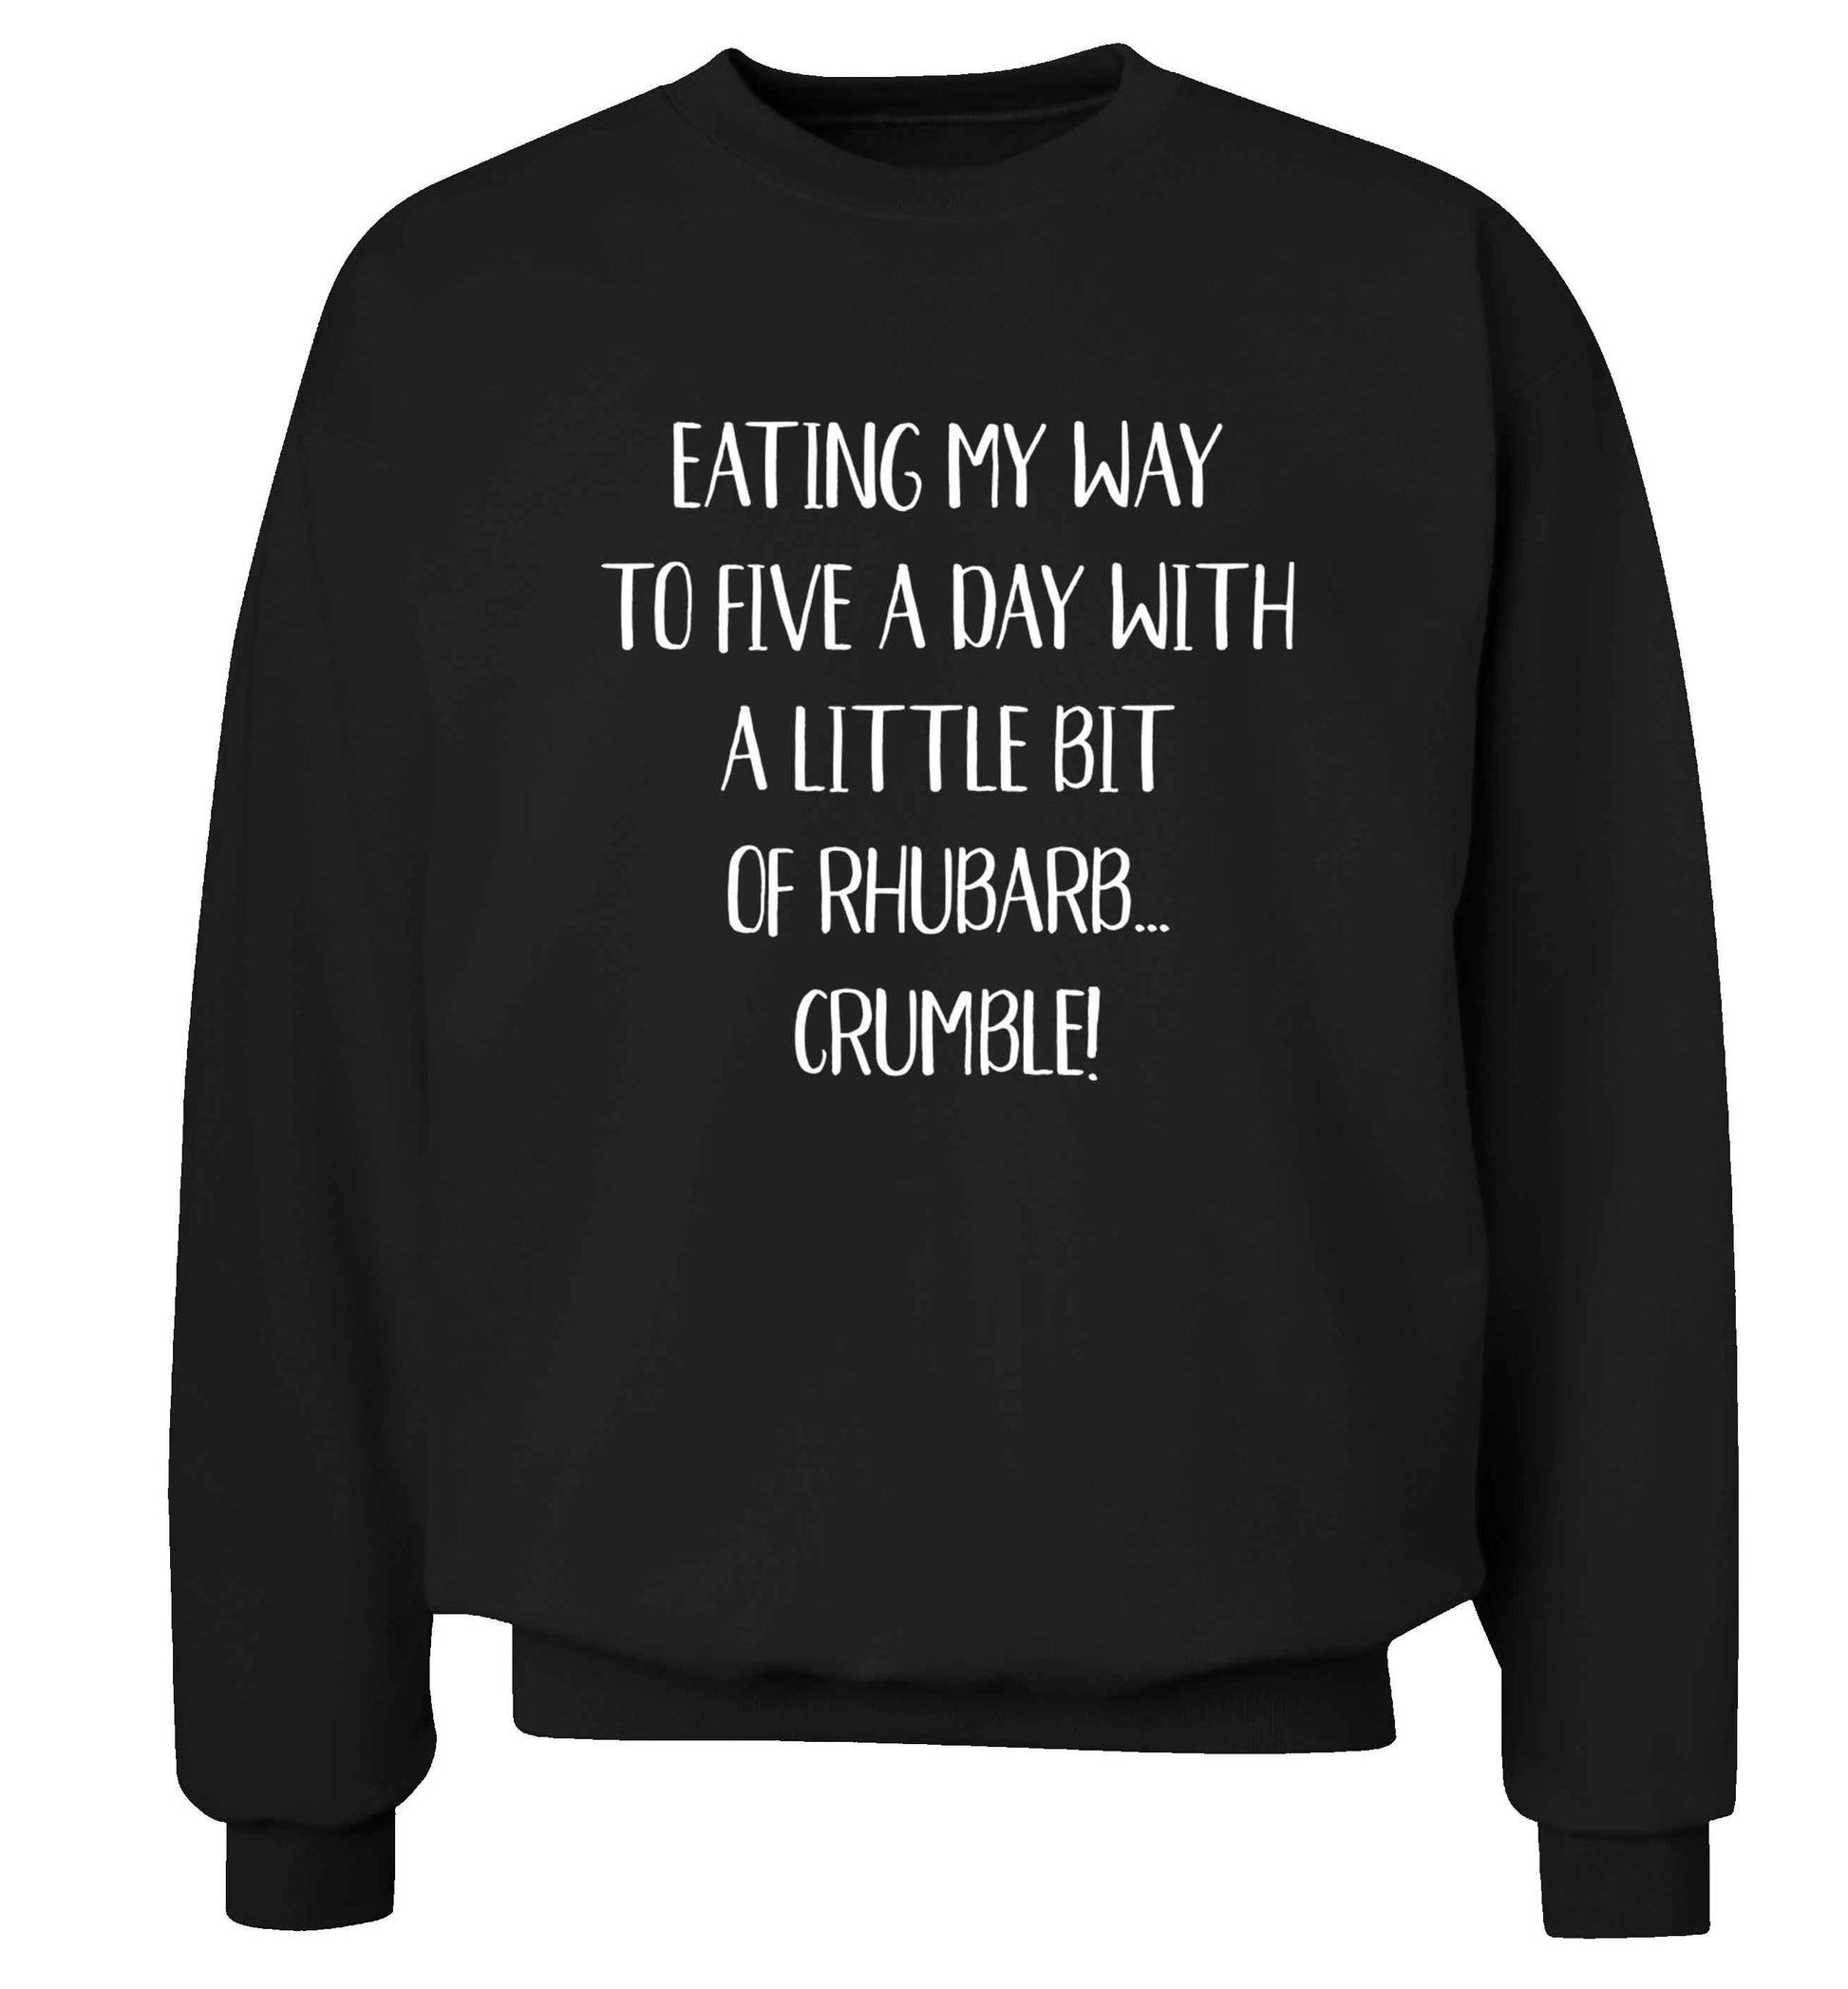 Eating my way to five a day with a little bit of rhubarb crumble Adult's unisex black Sweater 2XL